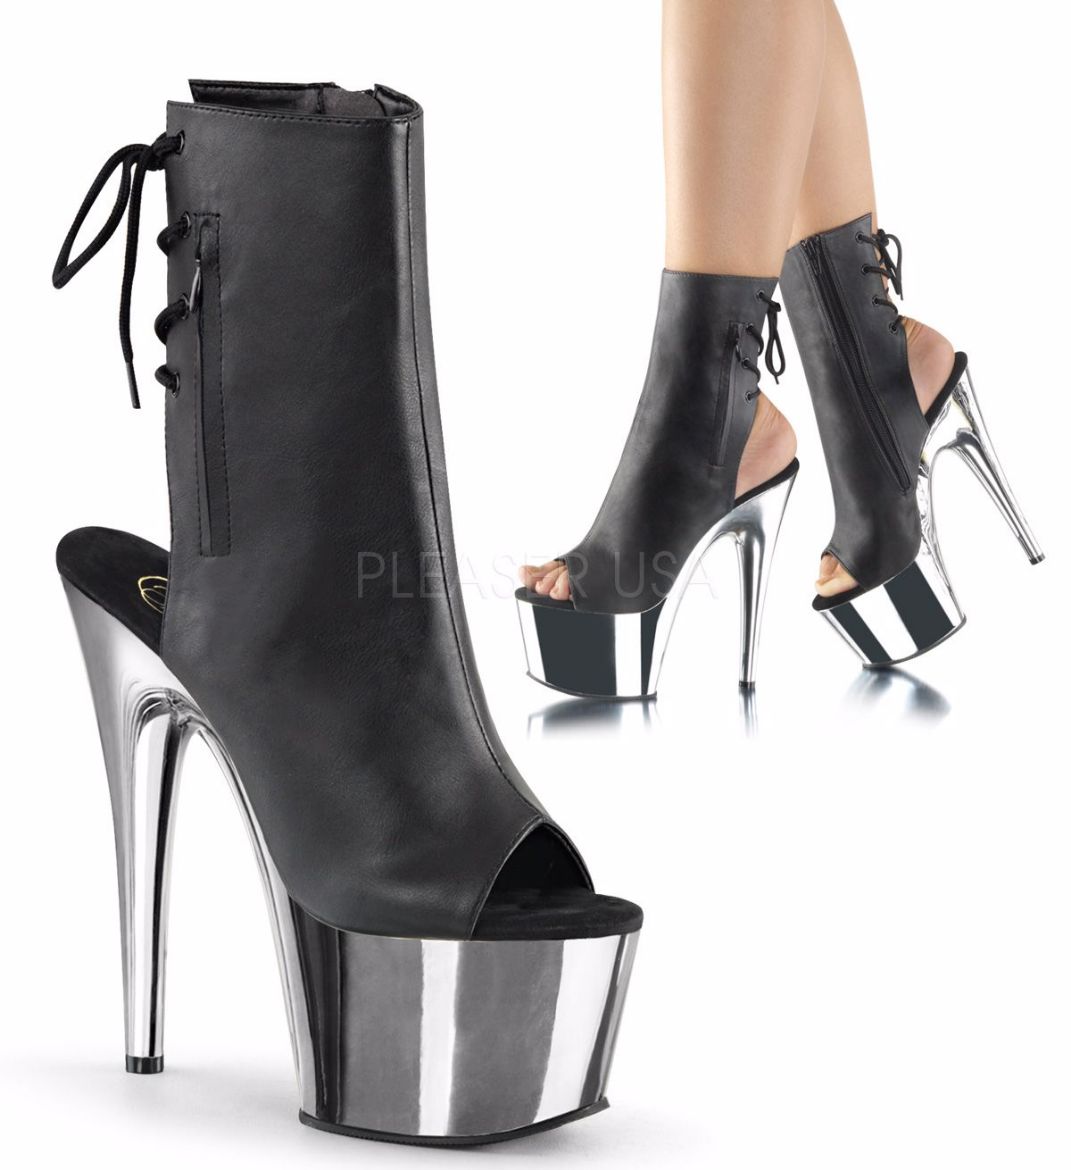 Product image of Pleaser Adore-1018 Black Faux Leather/Silver Chrome, 7 inch (17.8 cm) Heel, 2 3/4 inch (7 cm) Platform Ankle Boot